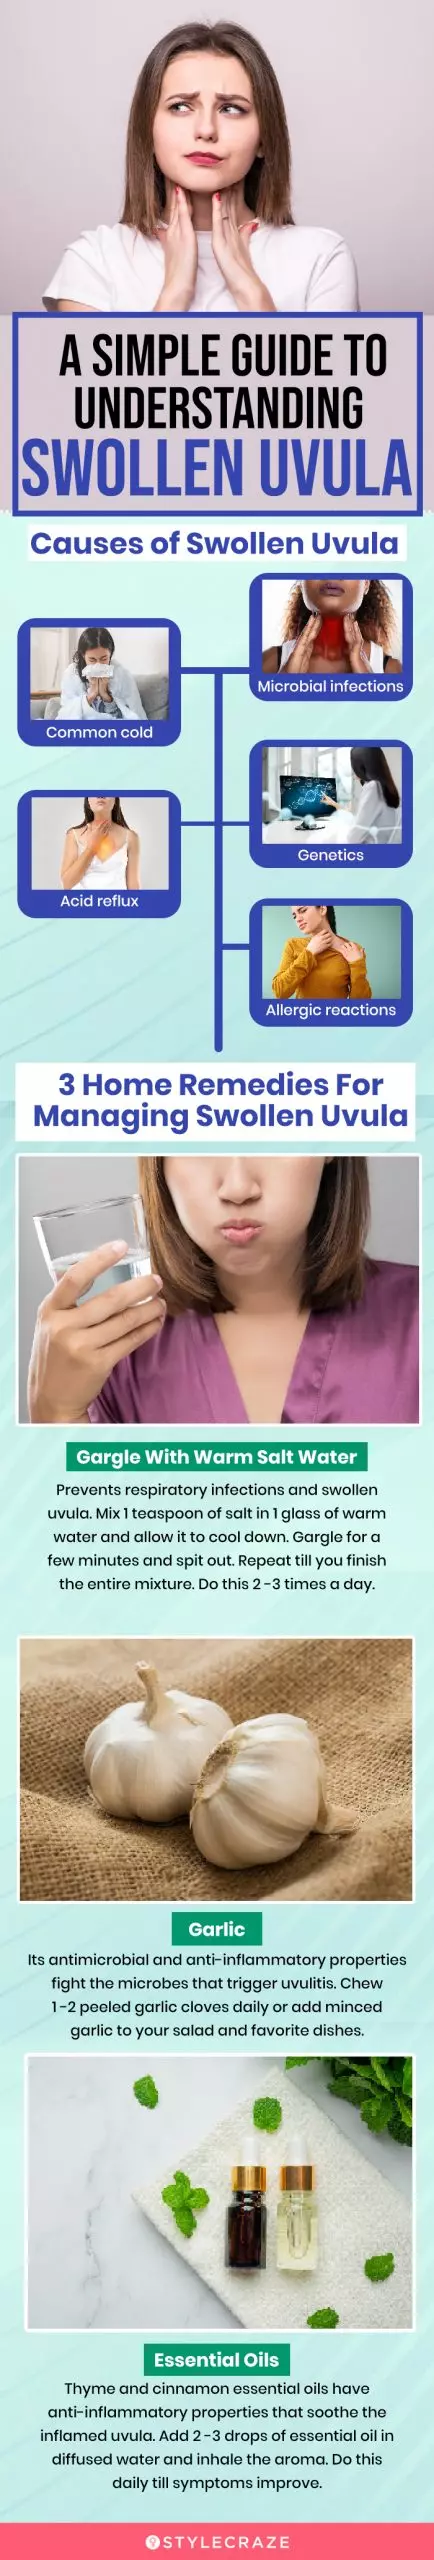 a simple guide to understanding swollen uvula (infographic)